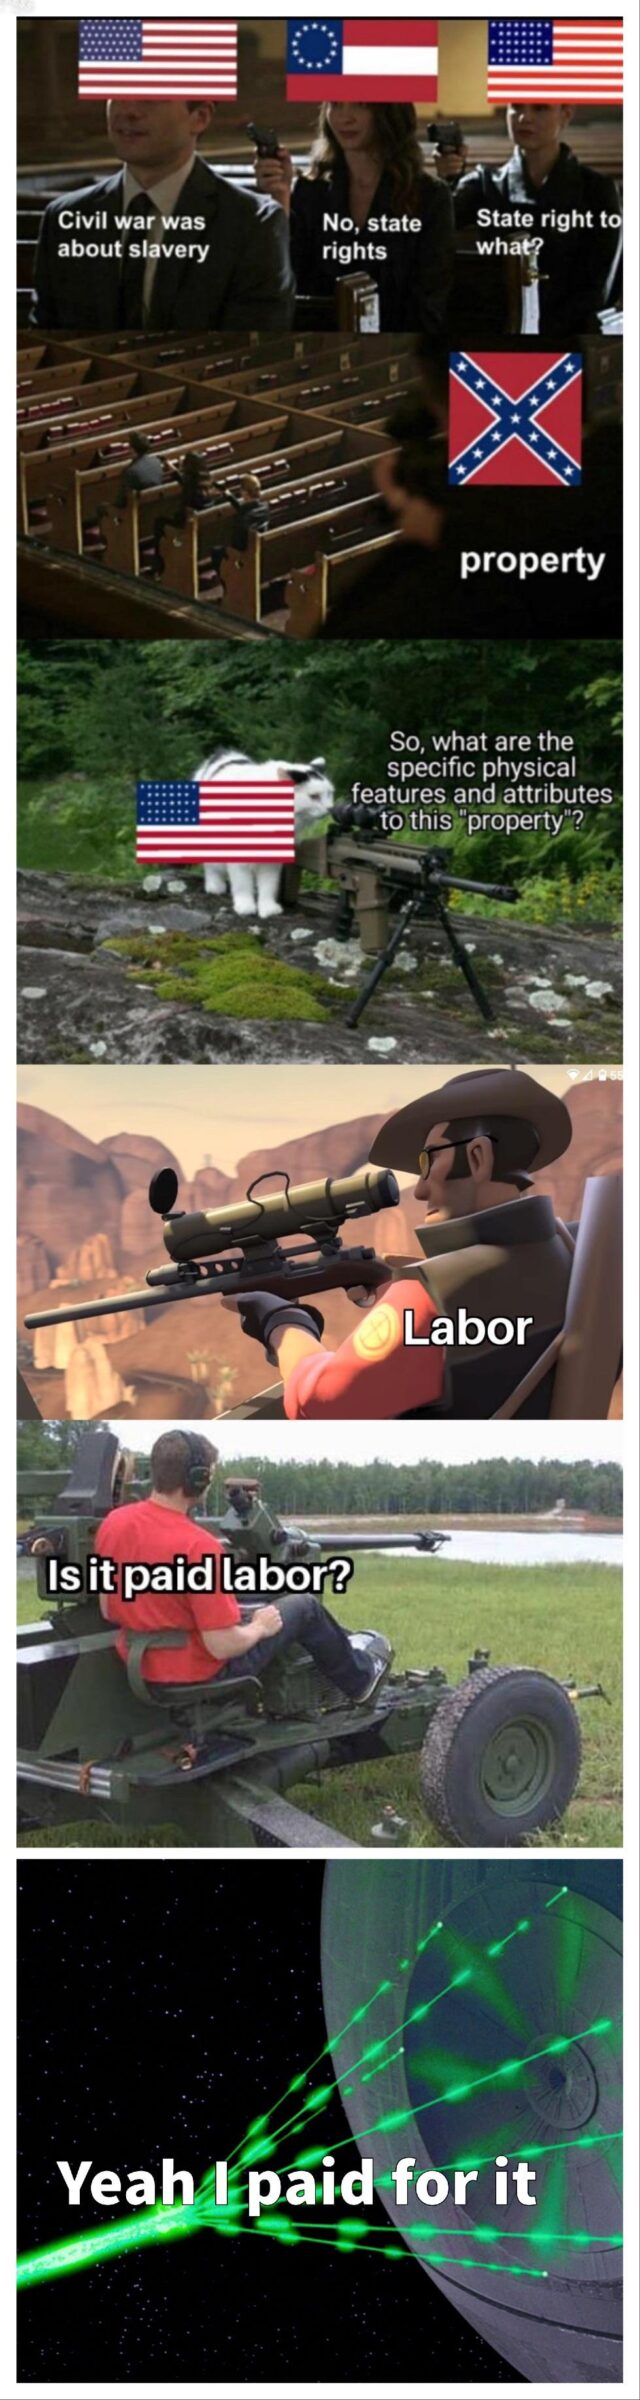 History, Confederacy, HistoryMemes, Civil War, Union, American History Memes History, Confederacy, HistoryMemes, Civil War, Union, American text: r was lavery State right to No, state rights property So, what are the specific physical features and attributes prdptrtye? Labor LIS if Oåid labor? Yeah Ml paid for 